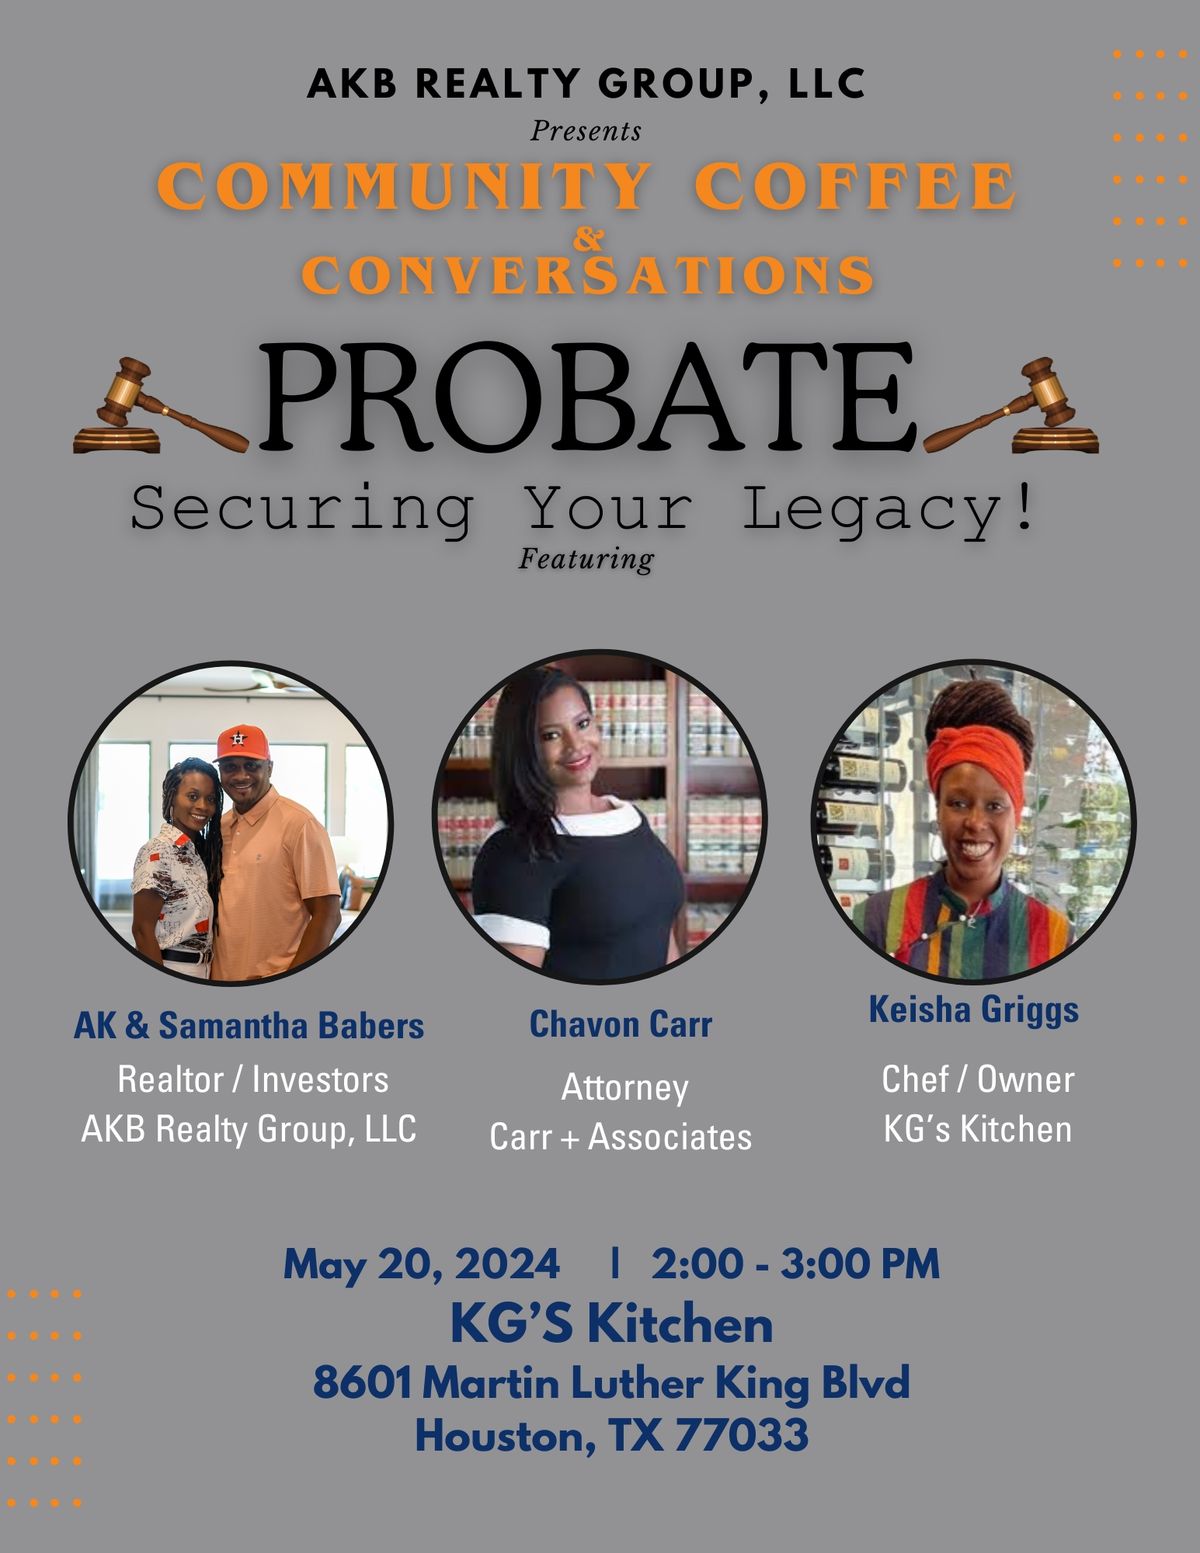 Community Coffee & Conversations: Probate Securing Your Legacy!